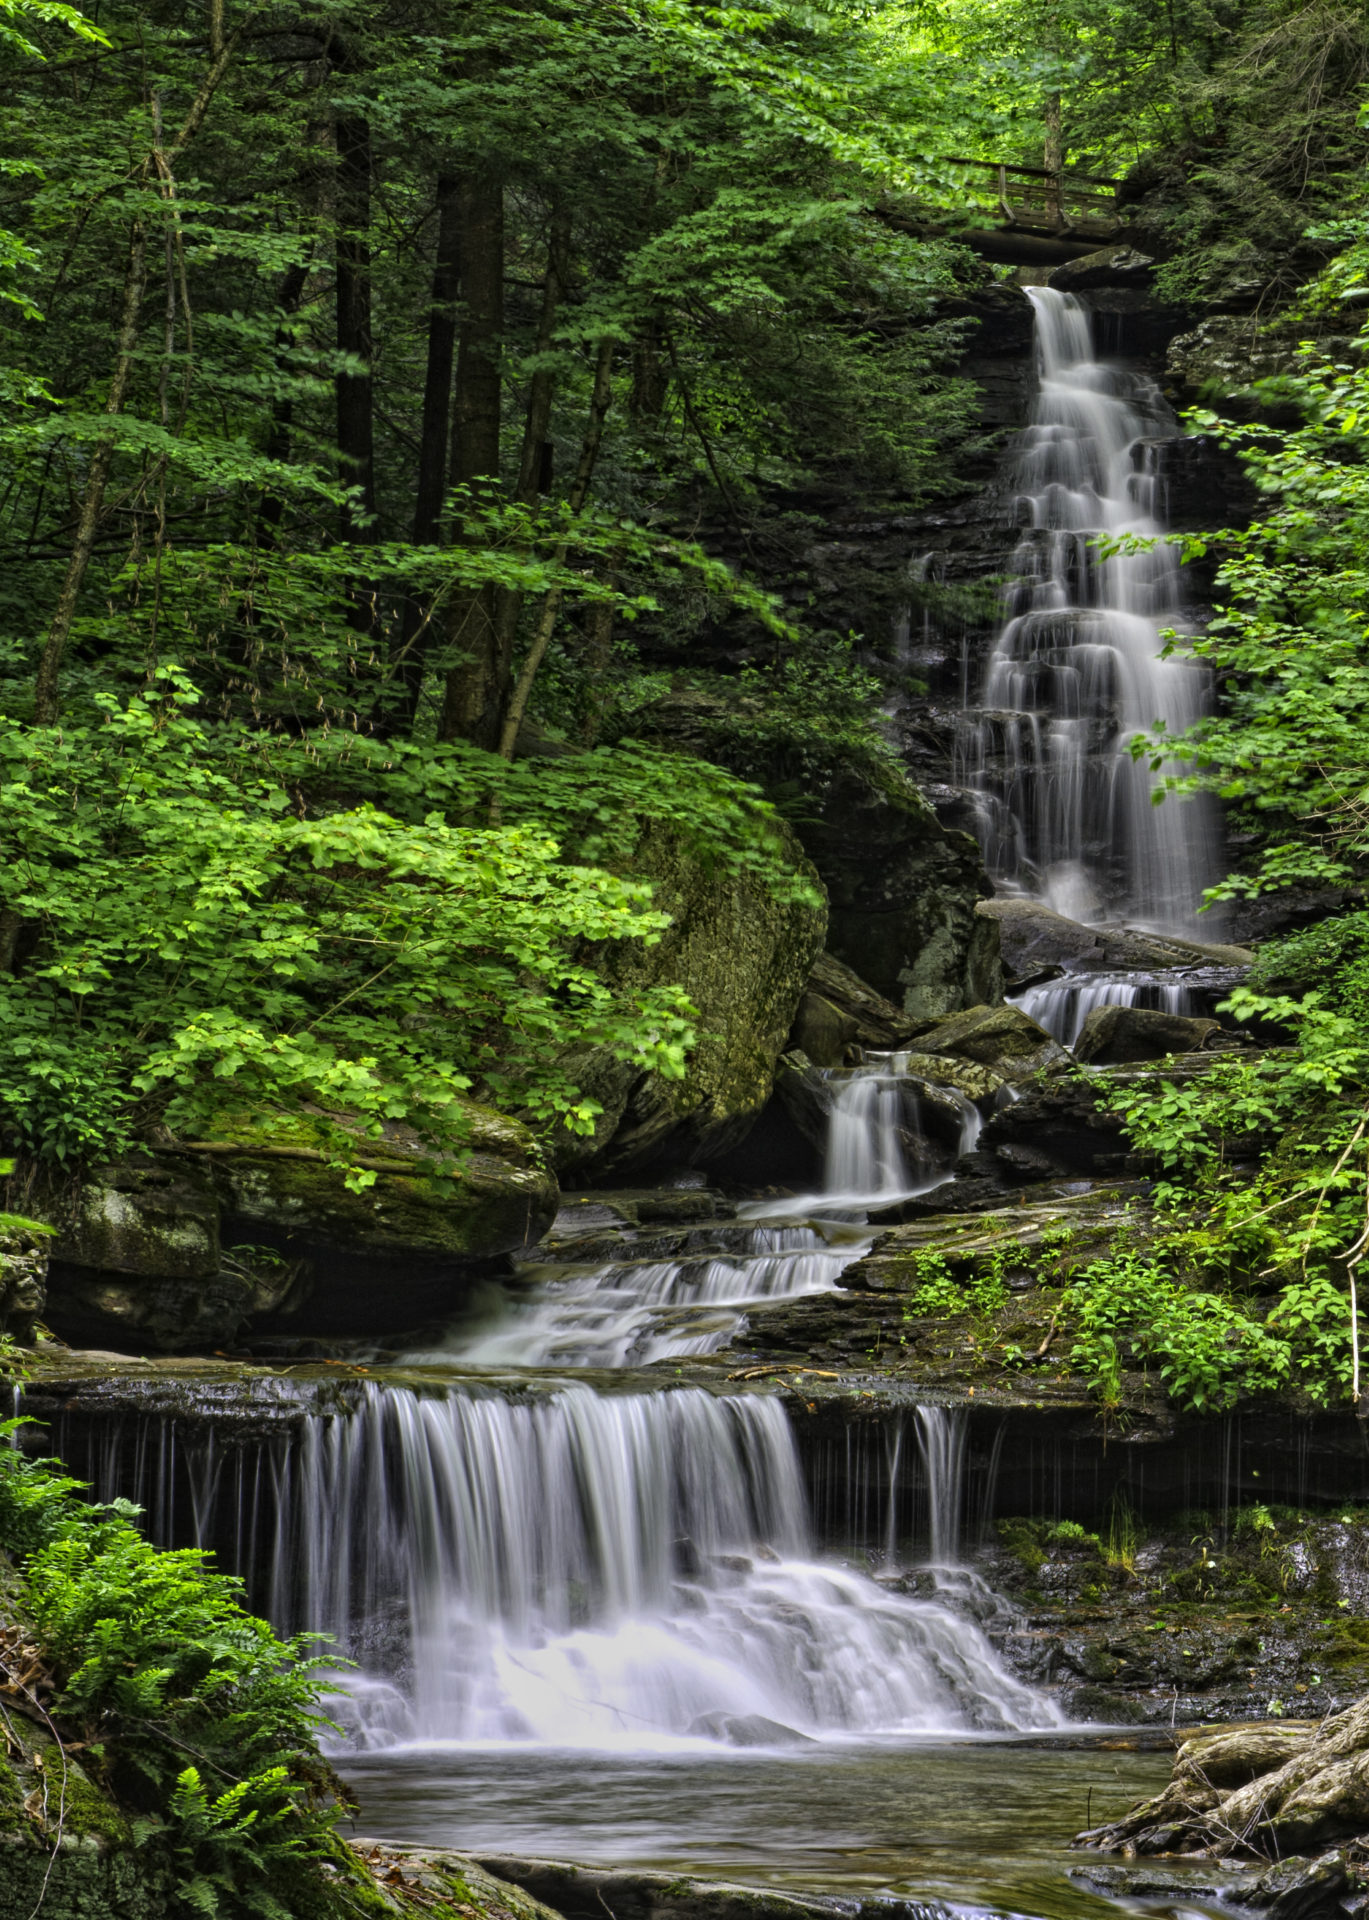 A tall waterfall in a rocky, forested gorge at Ricketts Glen.